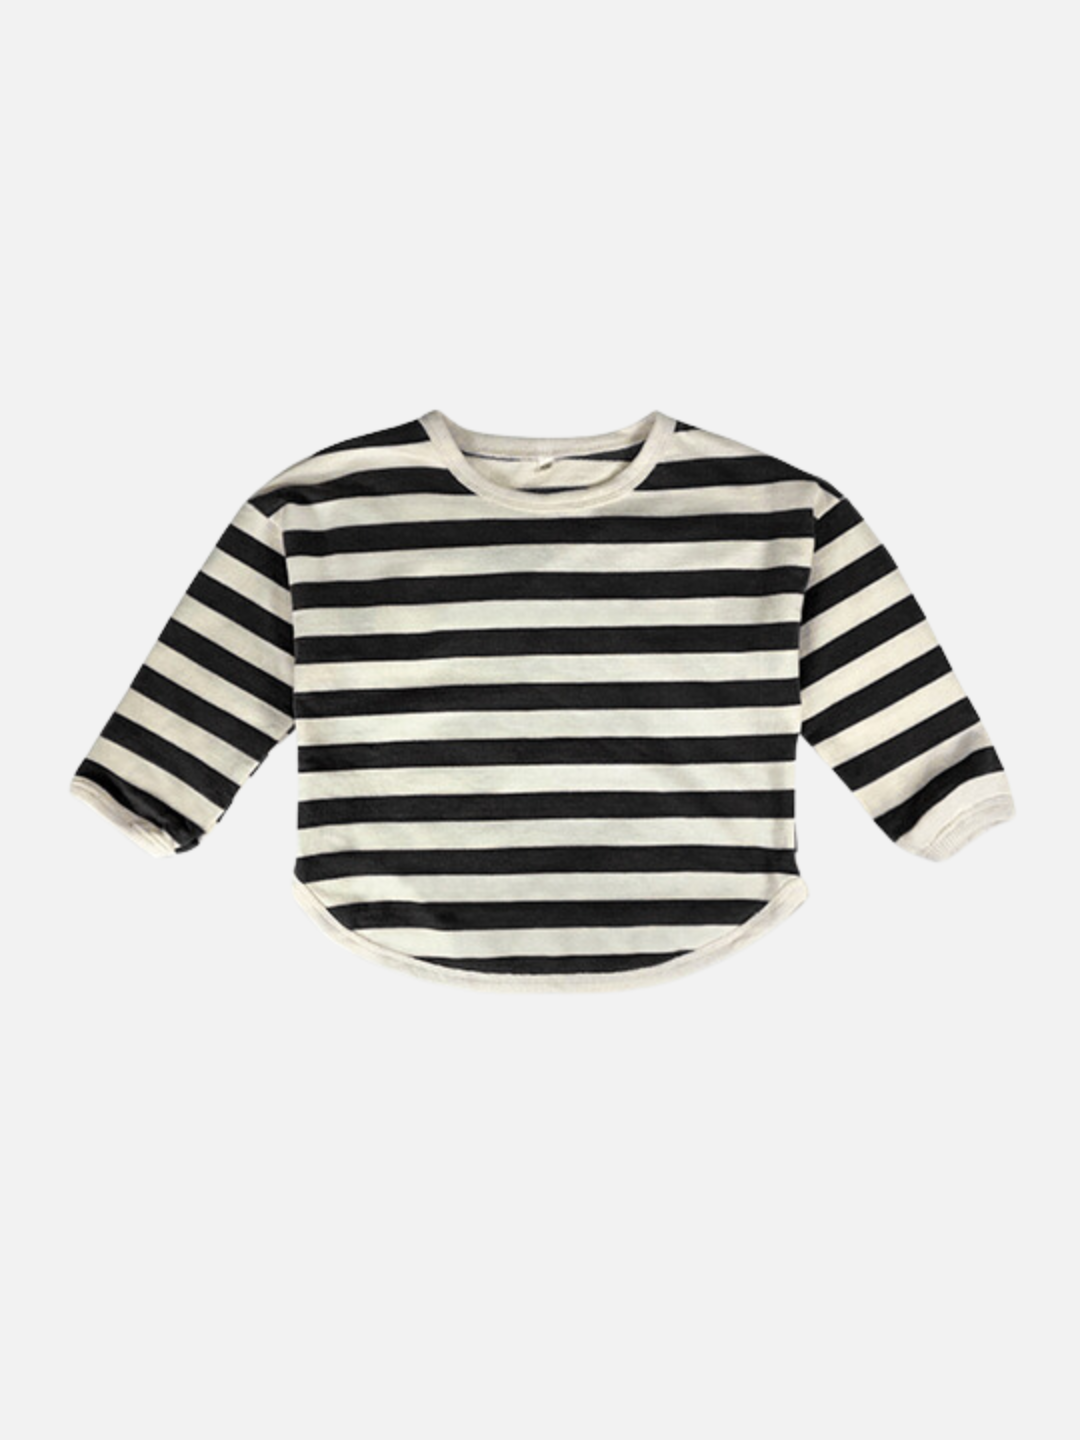 A kids' tee shirt with a curved hem in black and white stripes